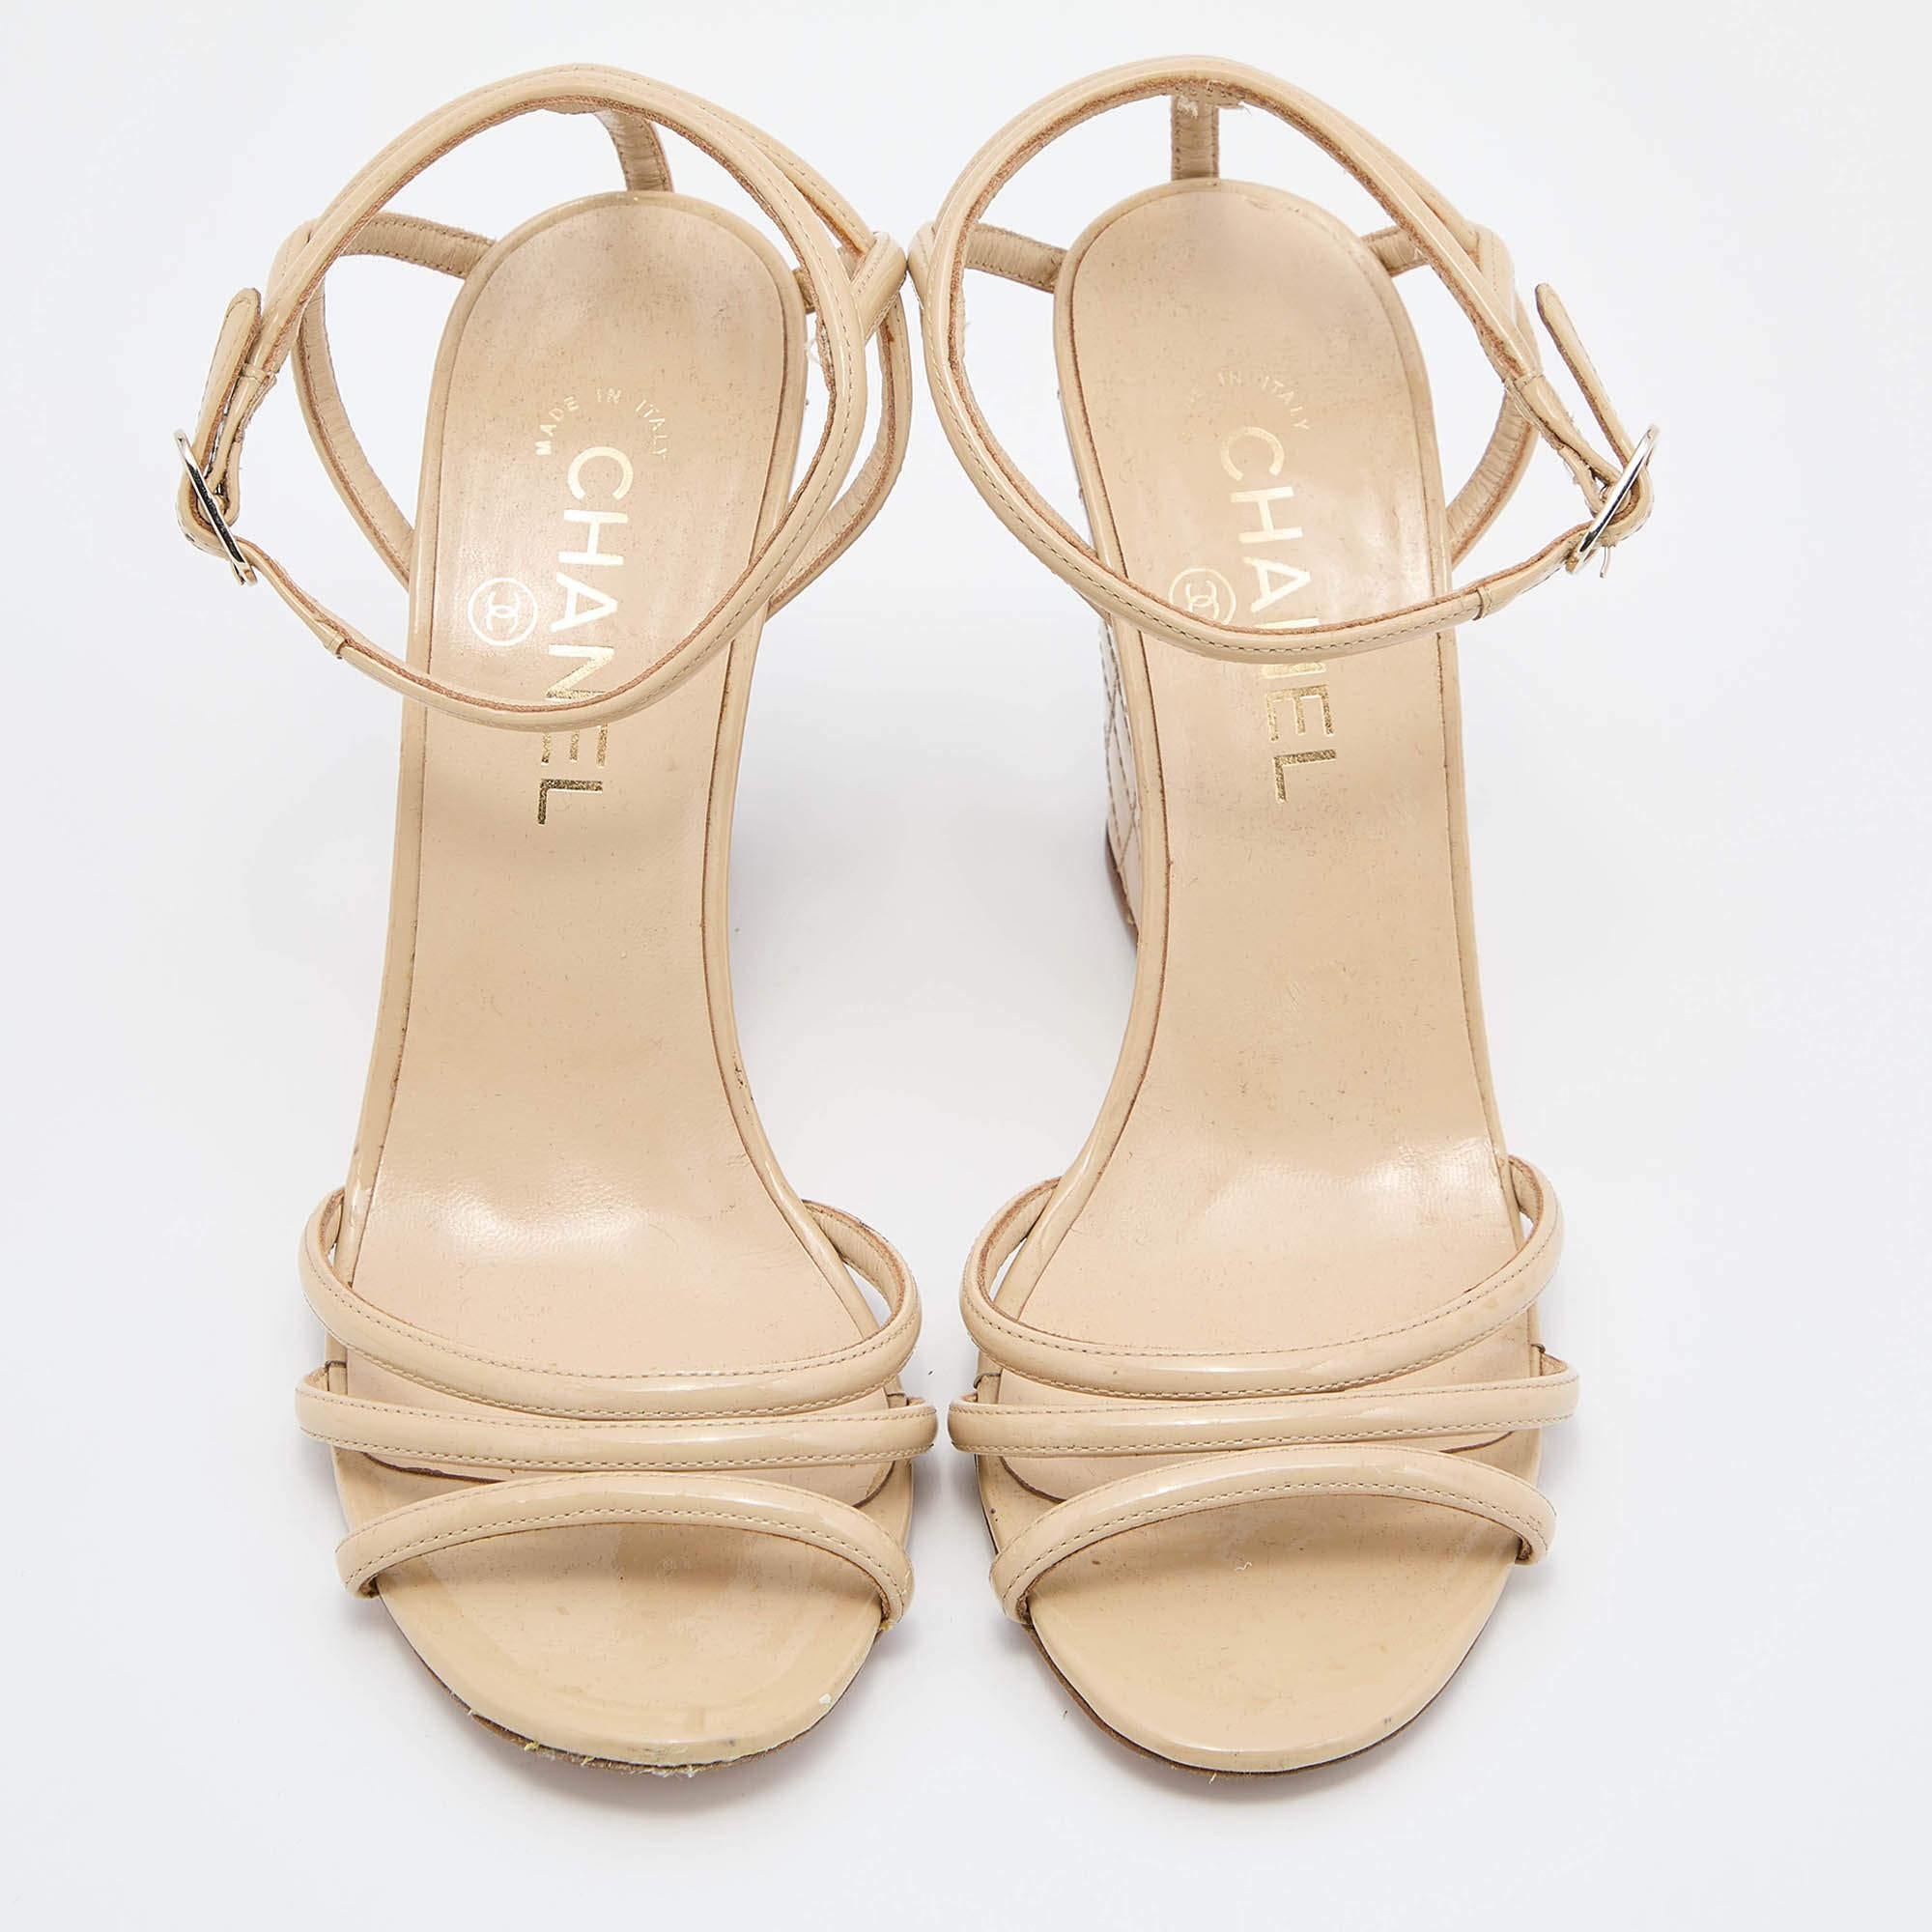 Women's Chanel Beige Patent Leather Wedge Open Toe Sandals Size 38.5